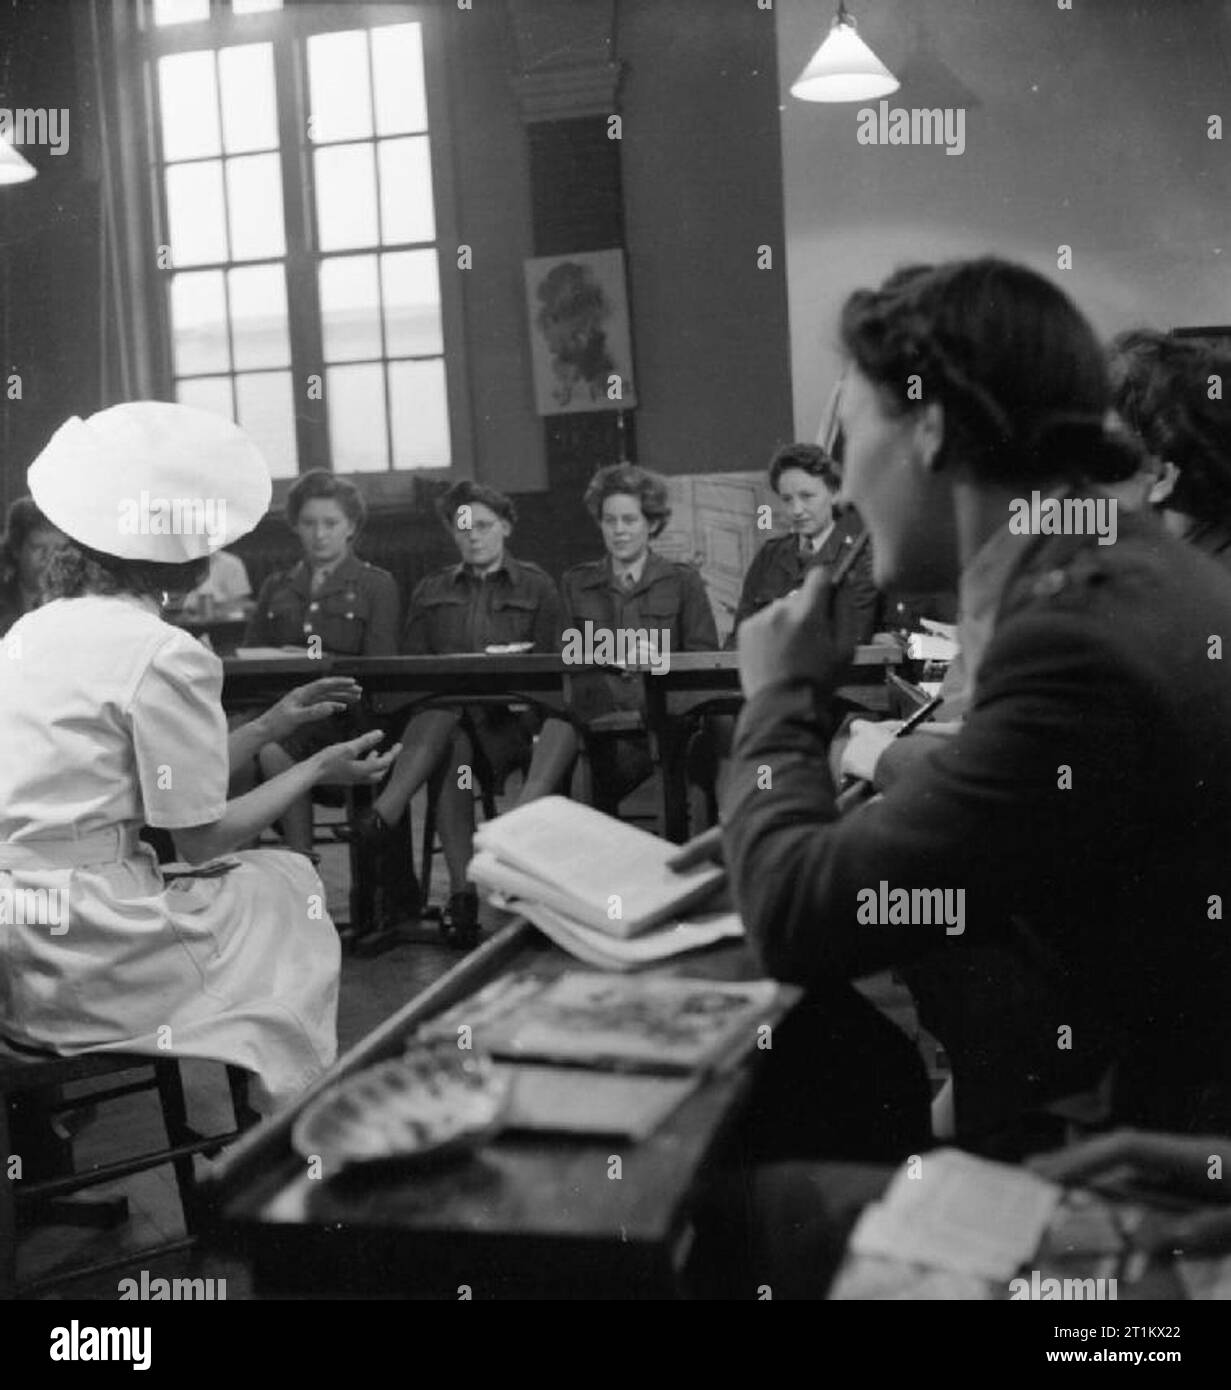 Ats Domestic Science Course in Notting Hill Gate, London, 1944 Chief instructor, Mrs Evans, talks to a class of girls on one of the Domestic Science Courses given to members of the Auxiliary Territorial Service (ATS) by the London District of the Army Education Scheme. The course was run in the Domestic Science block of London County Council's Avondale Park School in Notting Hill Gate. Stock Photo